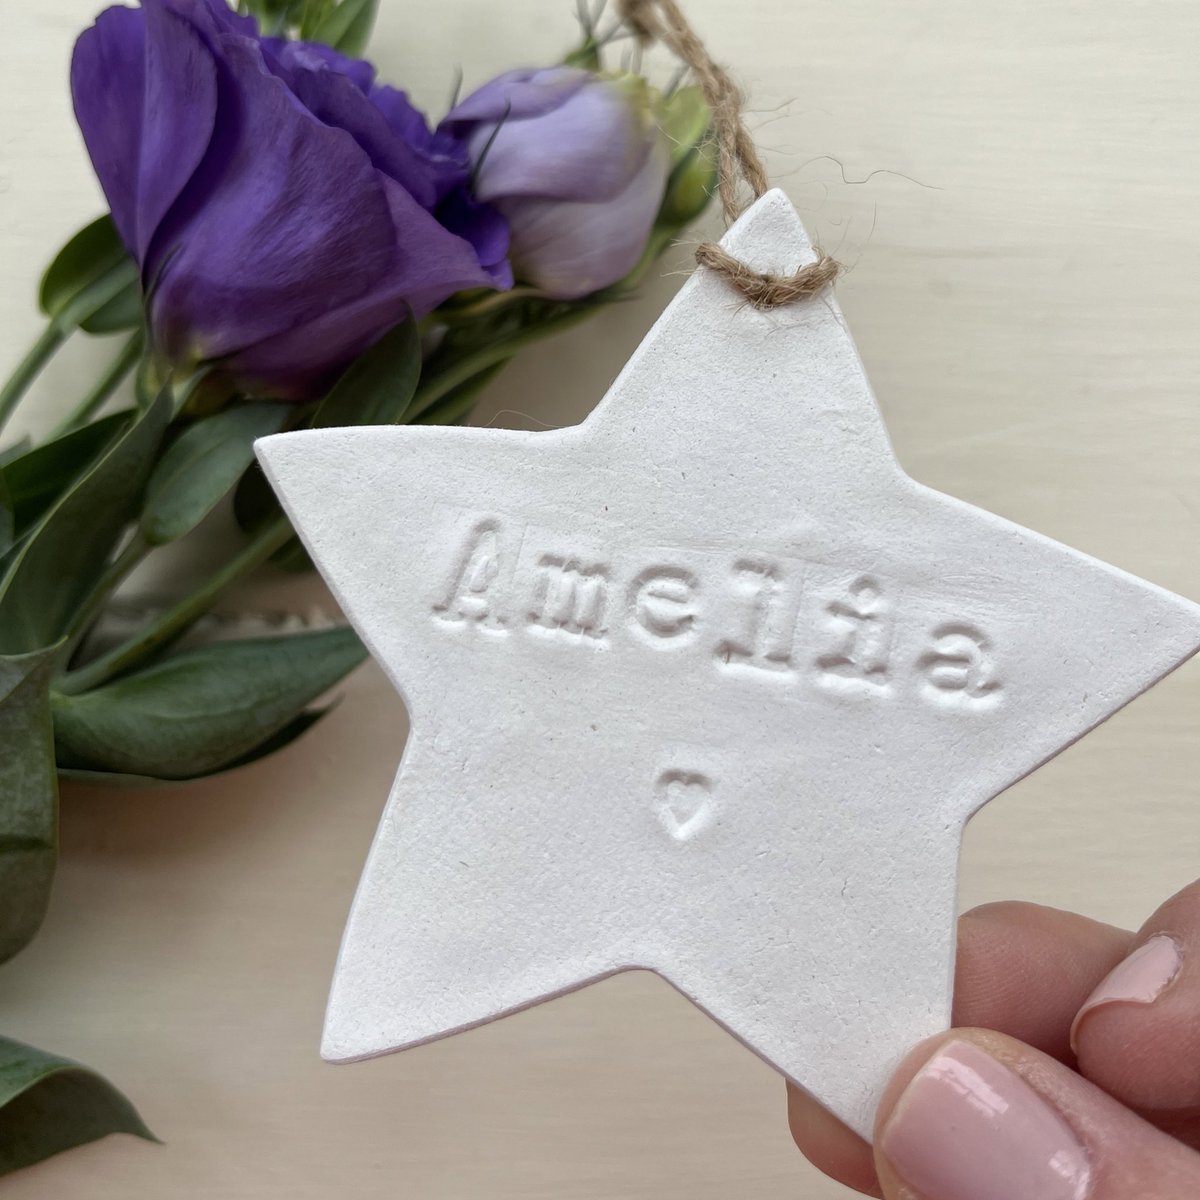 My personalised stars make a perfect teacher gift. Pop over to my Etsy shop to have a look 🤍 #claystar #weddingfavours #personalisedgift #teachergift #handmadegifttags #rusticstar #claystardecor #weddingdecor #weddingfavours #etsyshopuk #etsy #etsyuk #acornstationery